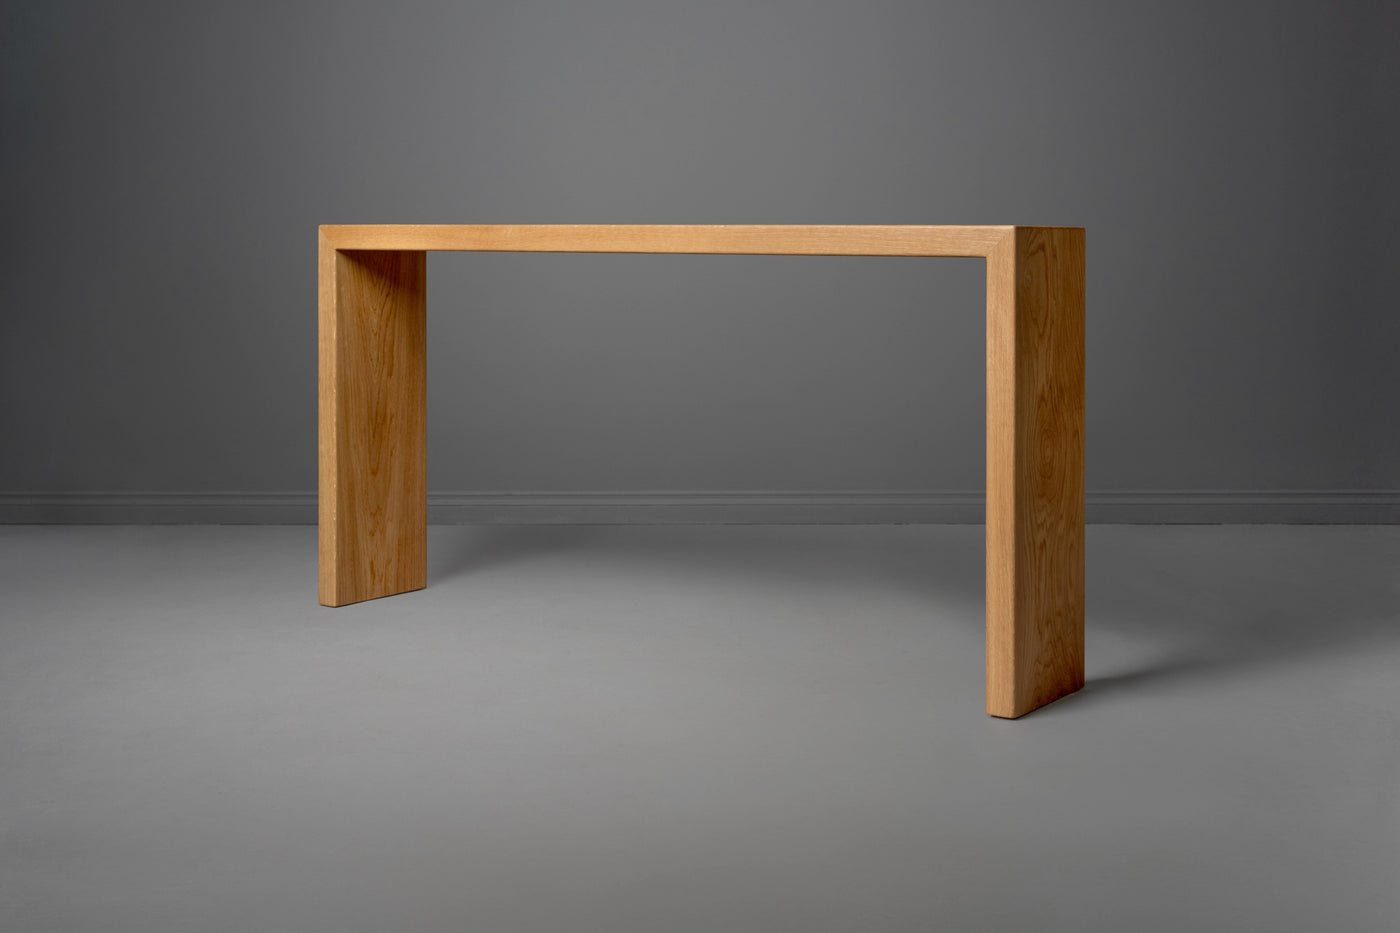 The Elizabeth Console Table